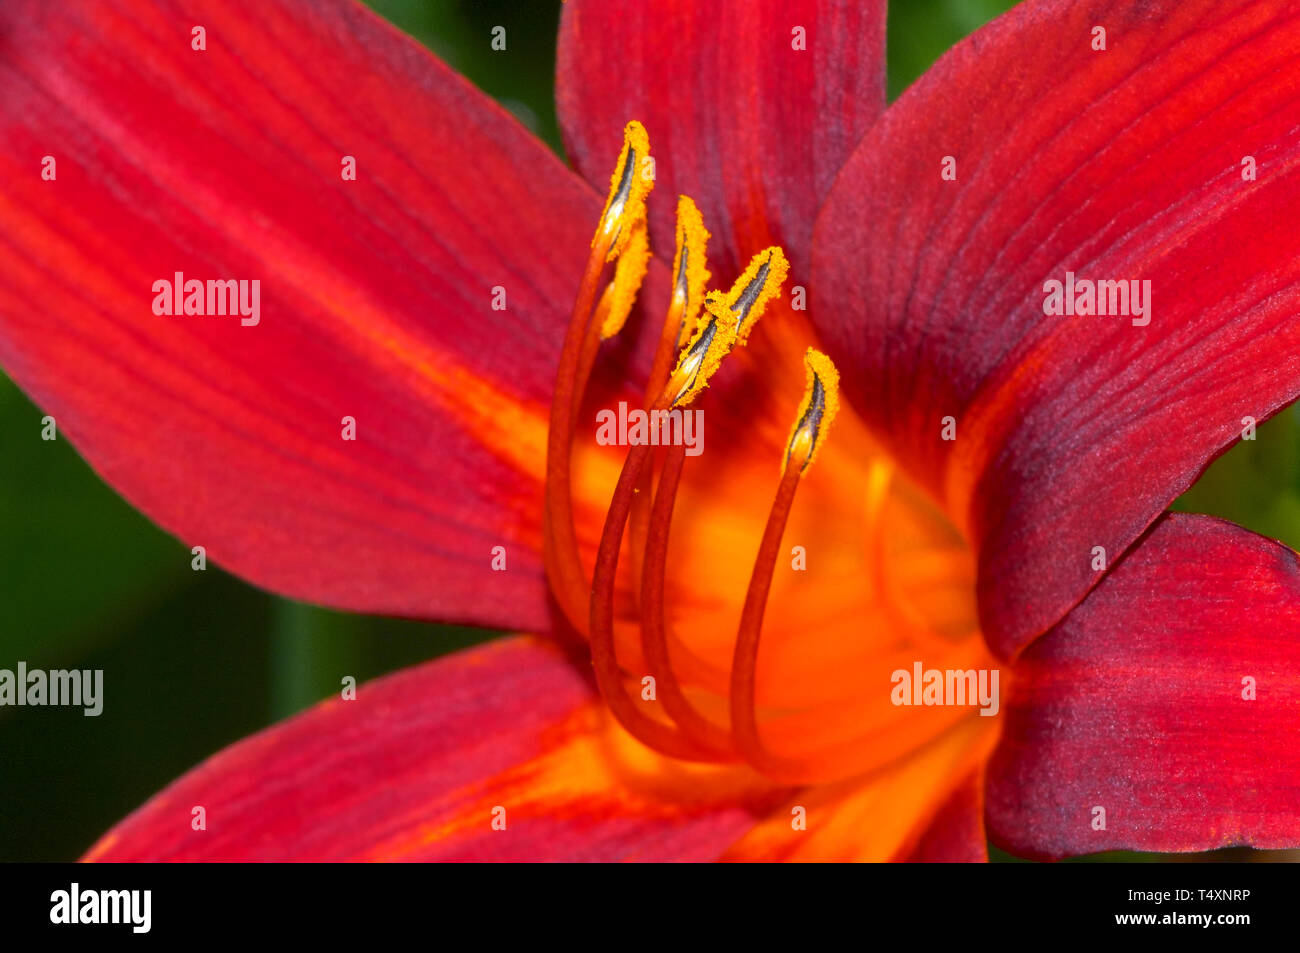 Close up of an orange daylily showing pollen on the tips of the stamen.(Hemerocallis) Stock Photo